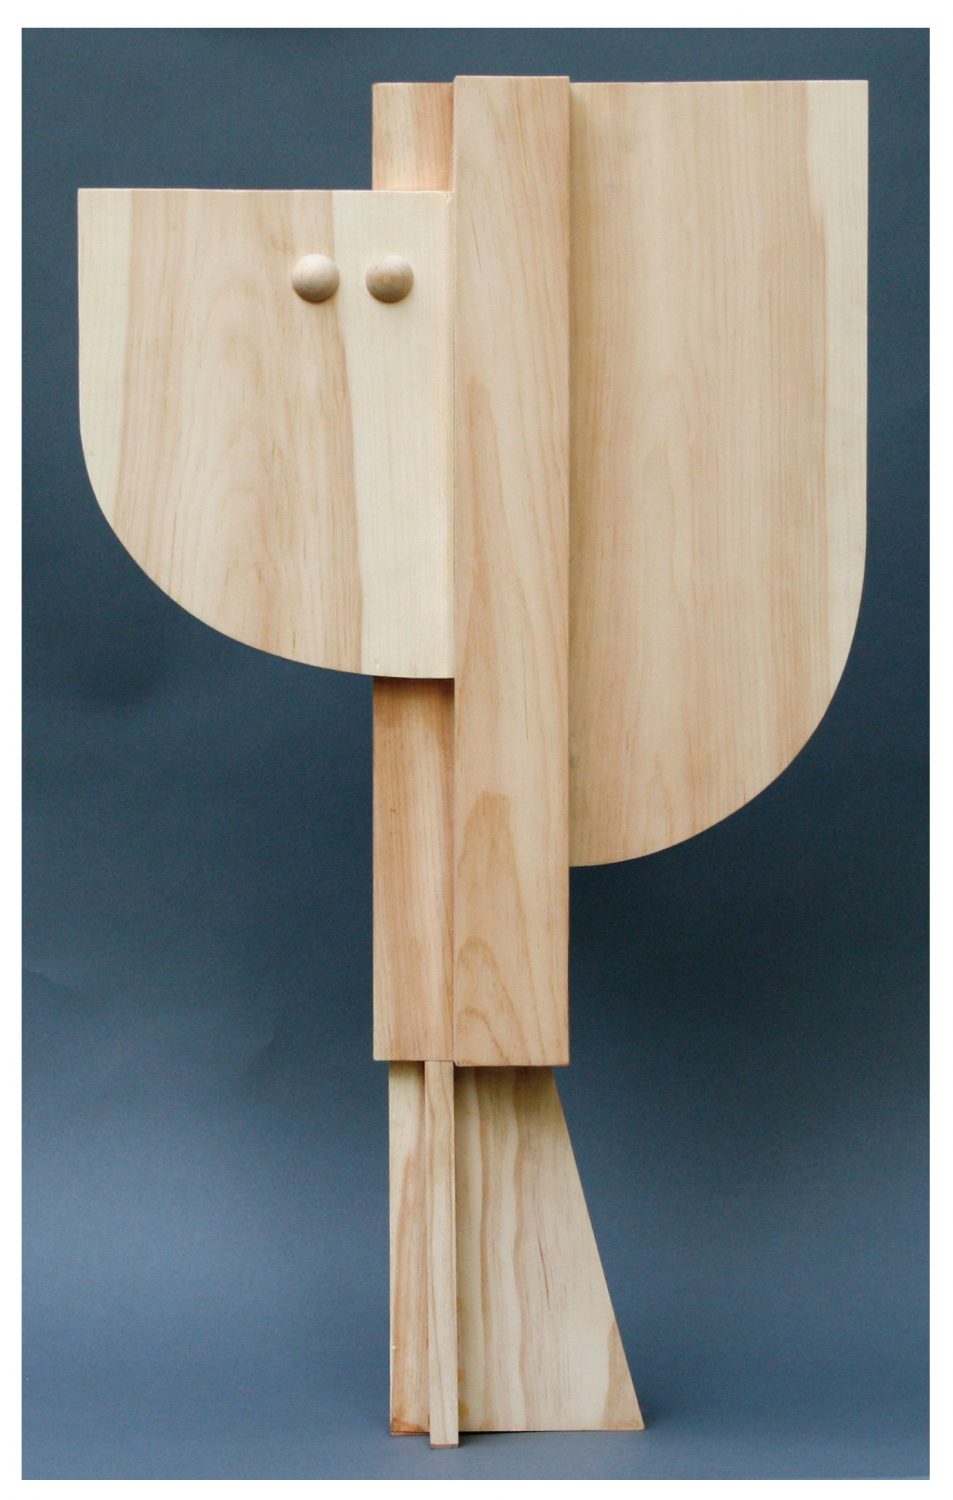 thumbnail of Female Figure by American artist Norman Gorbaty. Medium: pine wood. dimensions: 36 x 21 x 7 inches. date: 2007